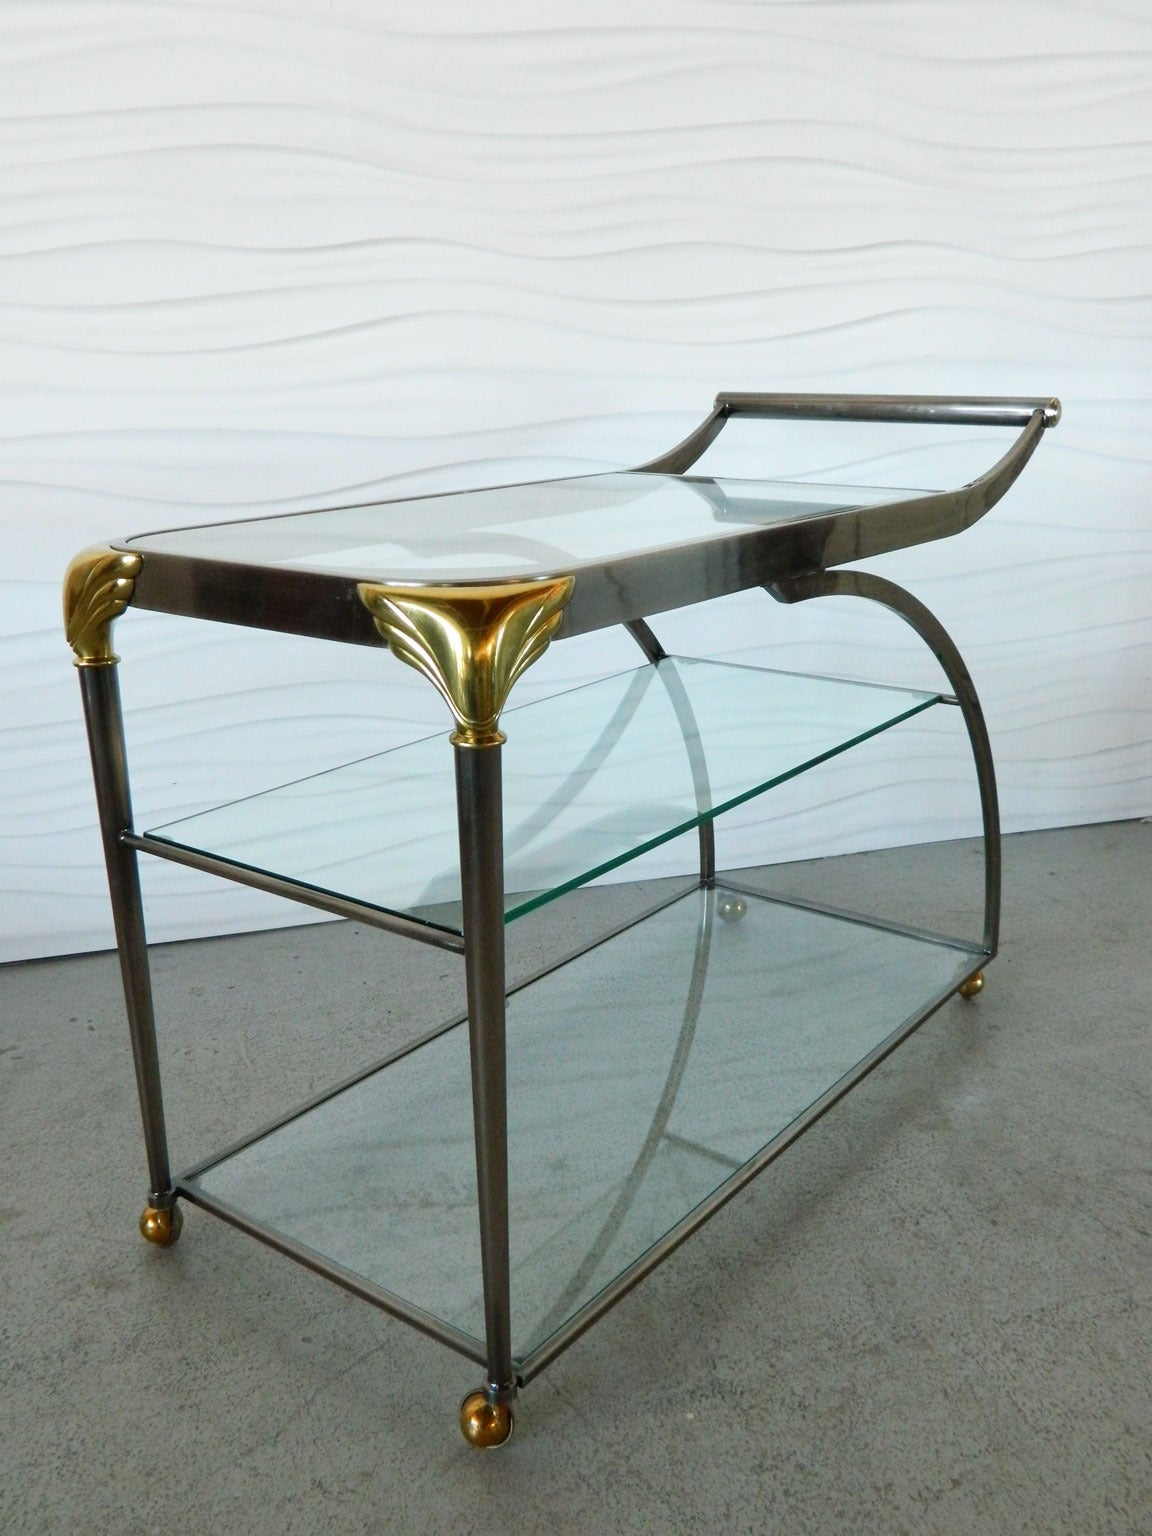 Inspired by the Deco era, this handsome bar cart with gold accets has three generously-sized glass storage/serving surfaces. The top surface has decorative etching. Casters allow the cart to be moved easily.